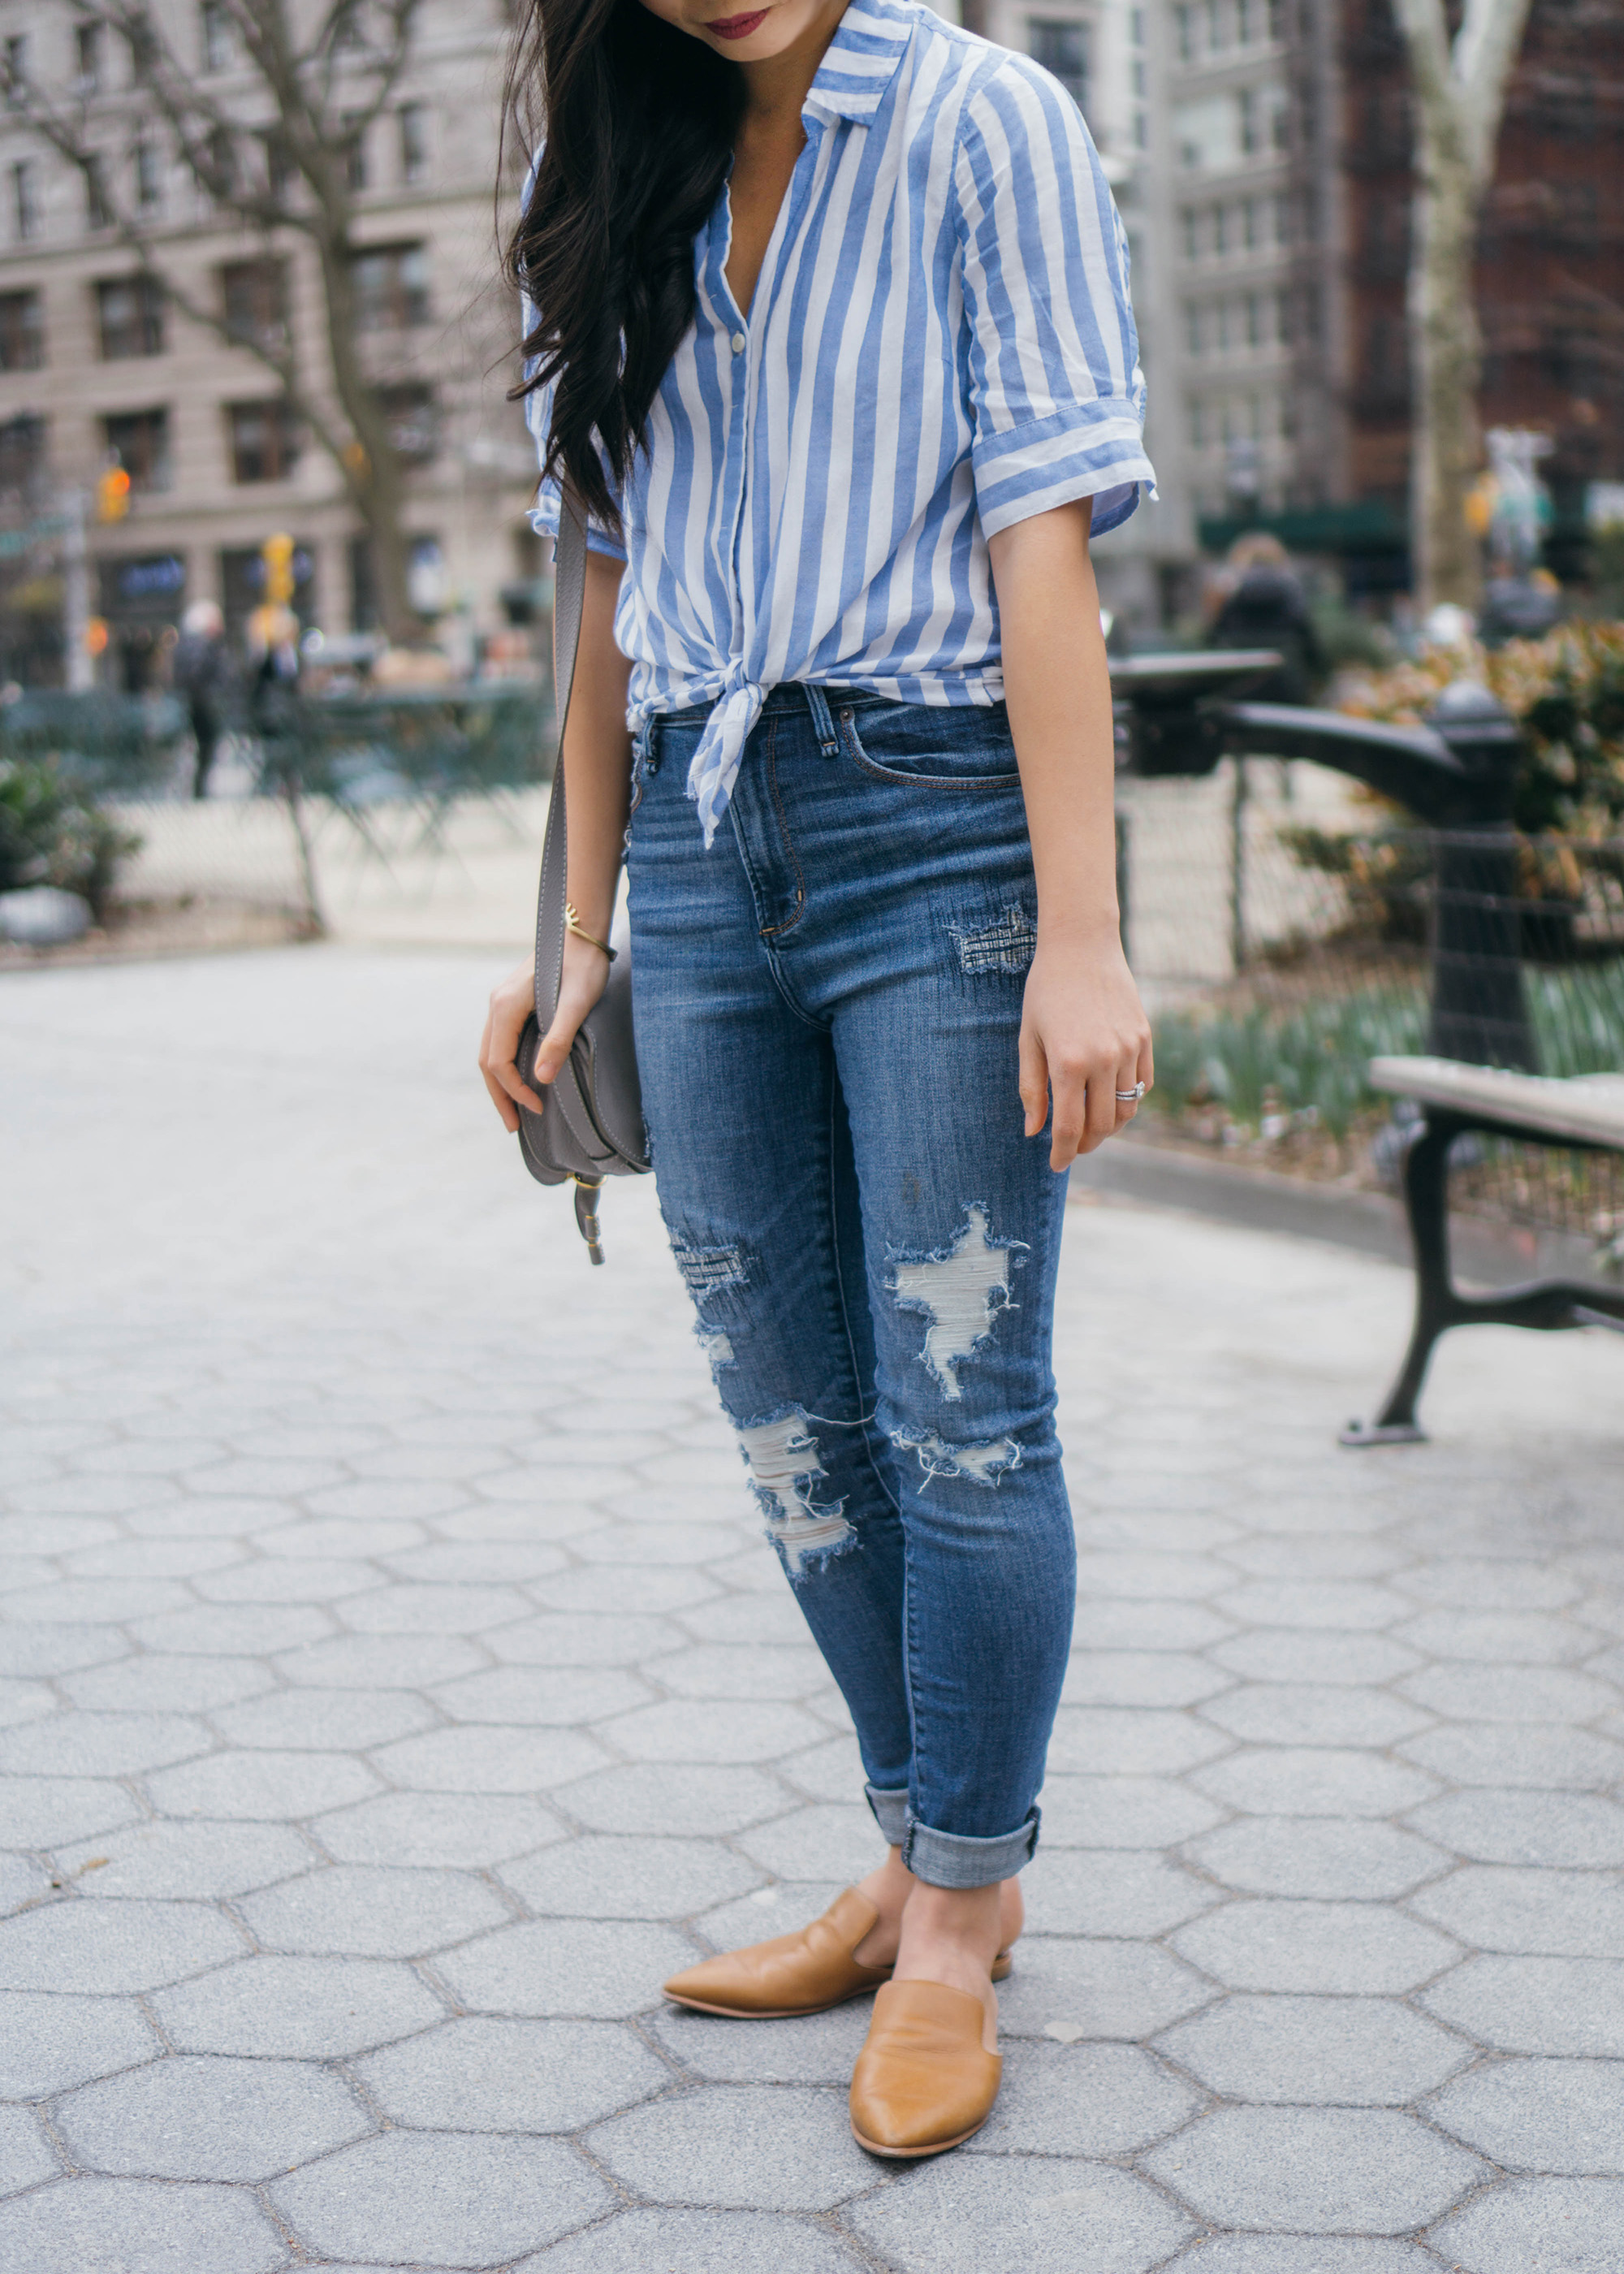 Casual Outfit Inspiration / Striped Short Sleeve Shirt & Ripped Jeans